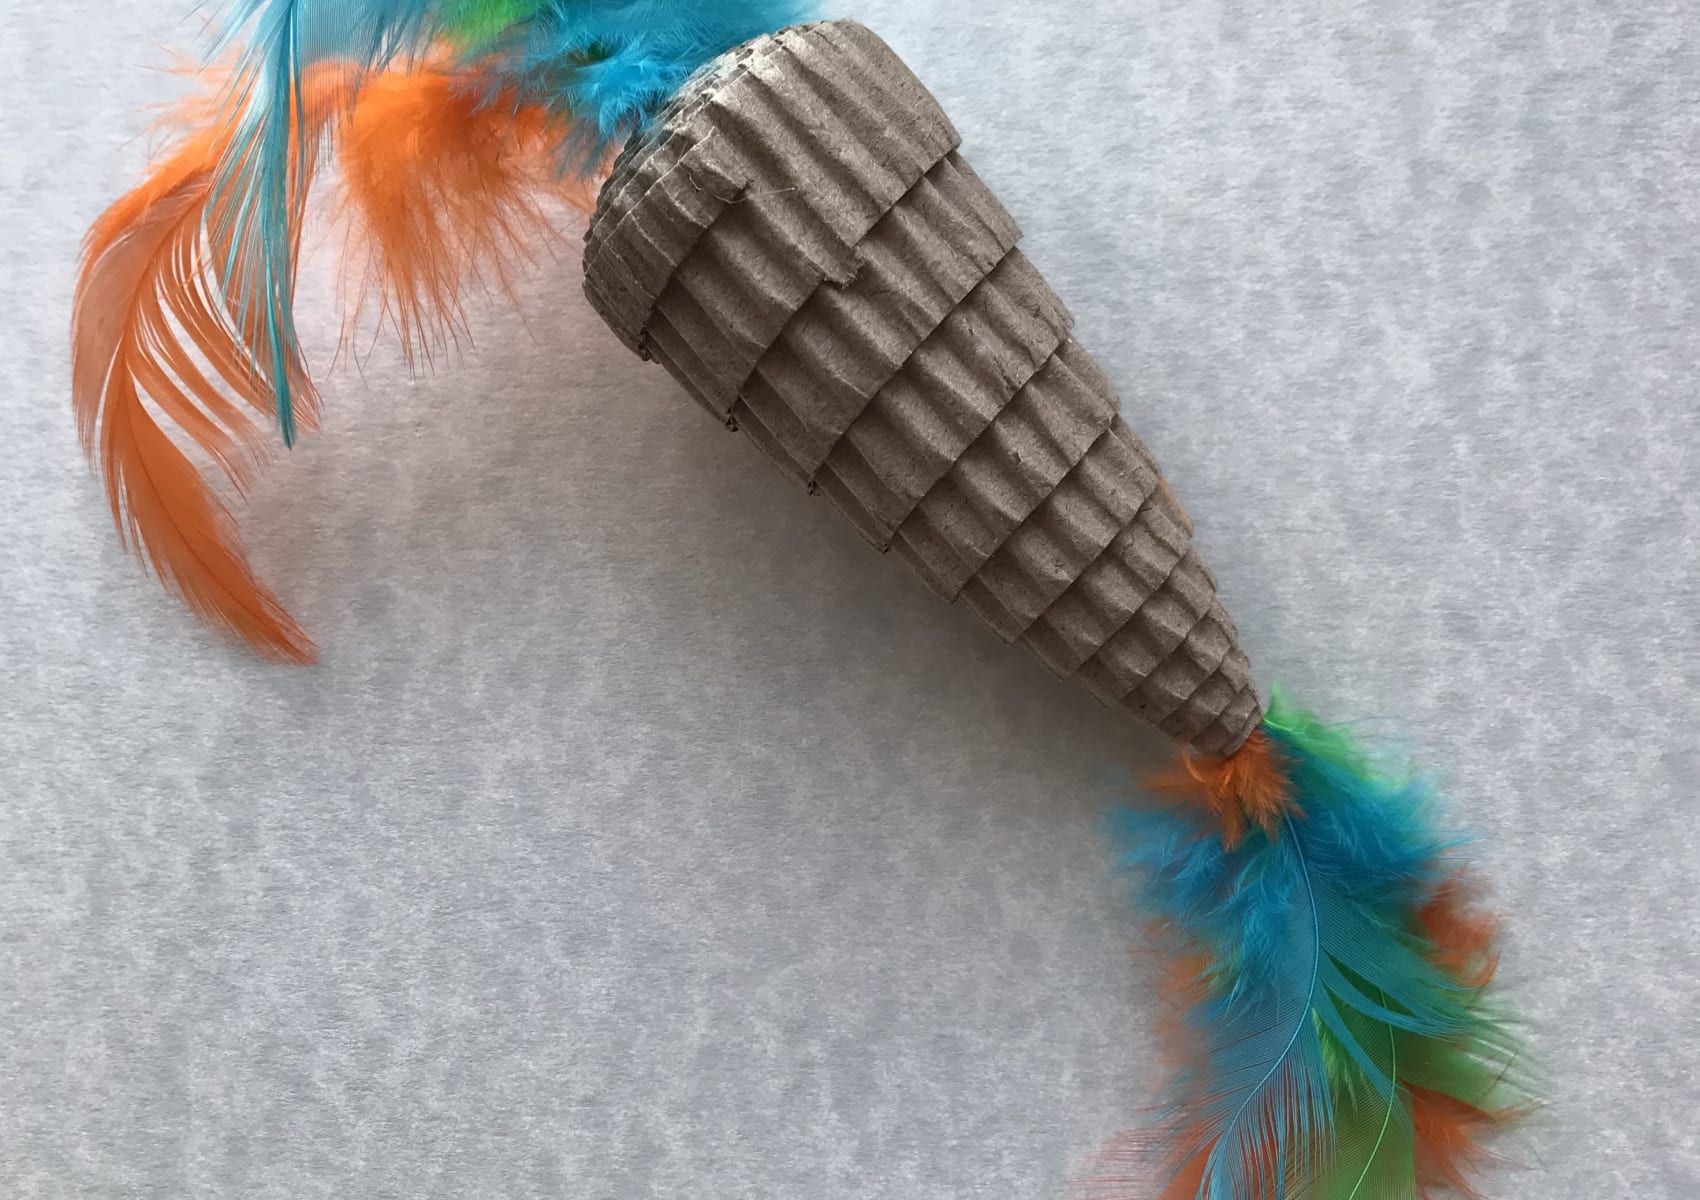 Sturdy cardboard and feather cat toy shaped like a pineapple